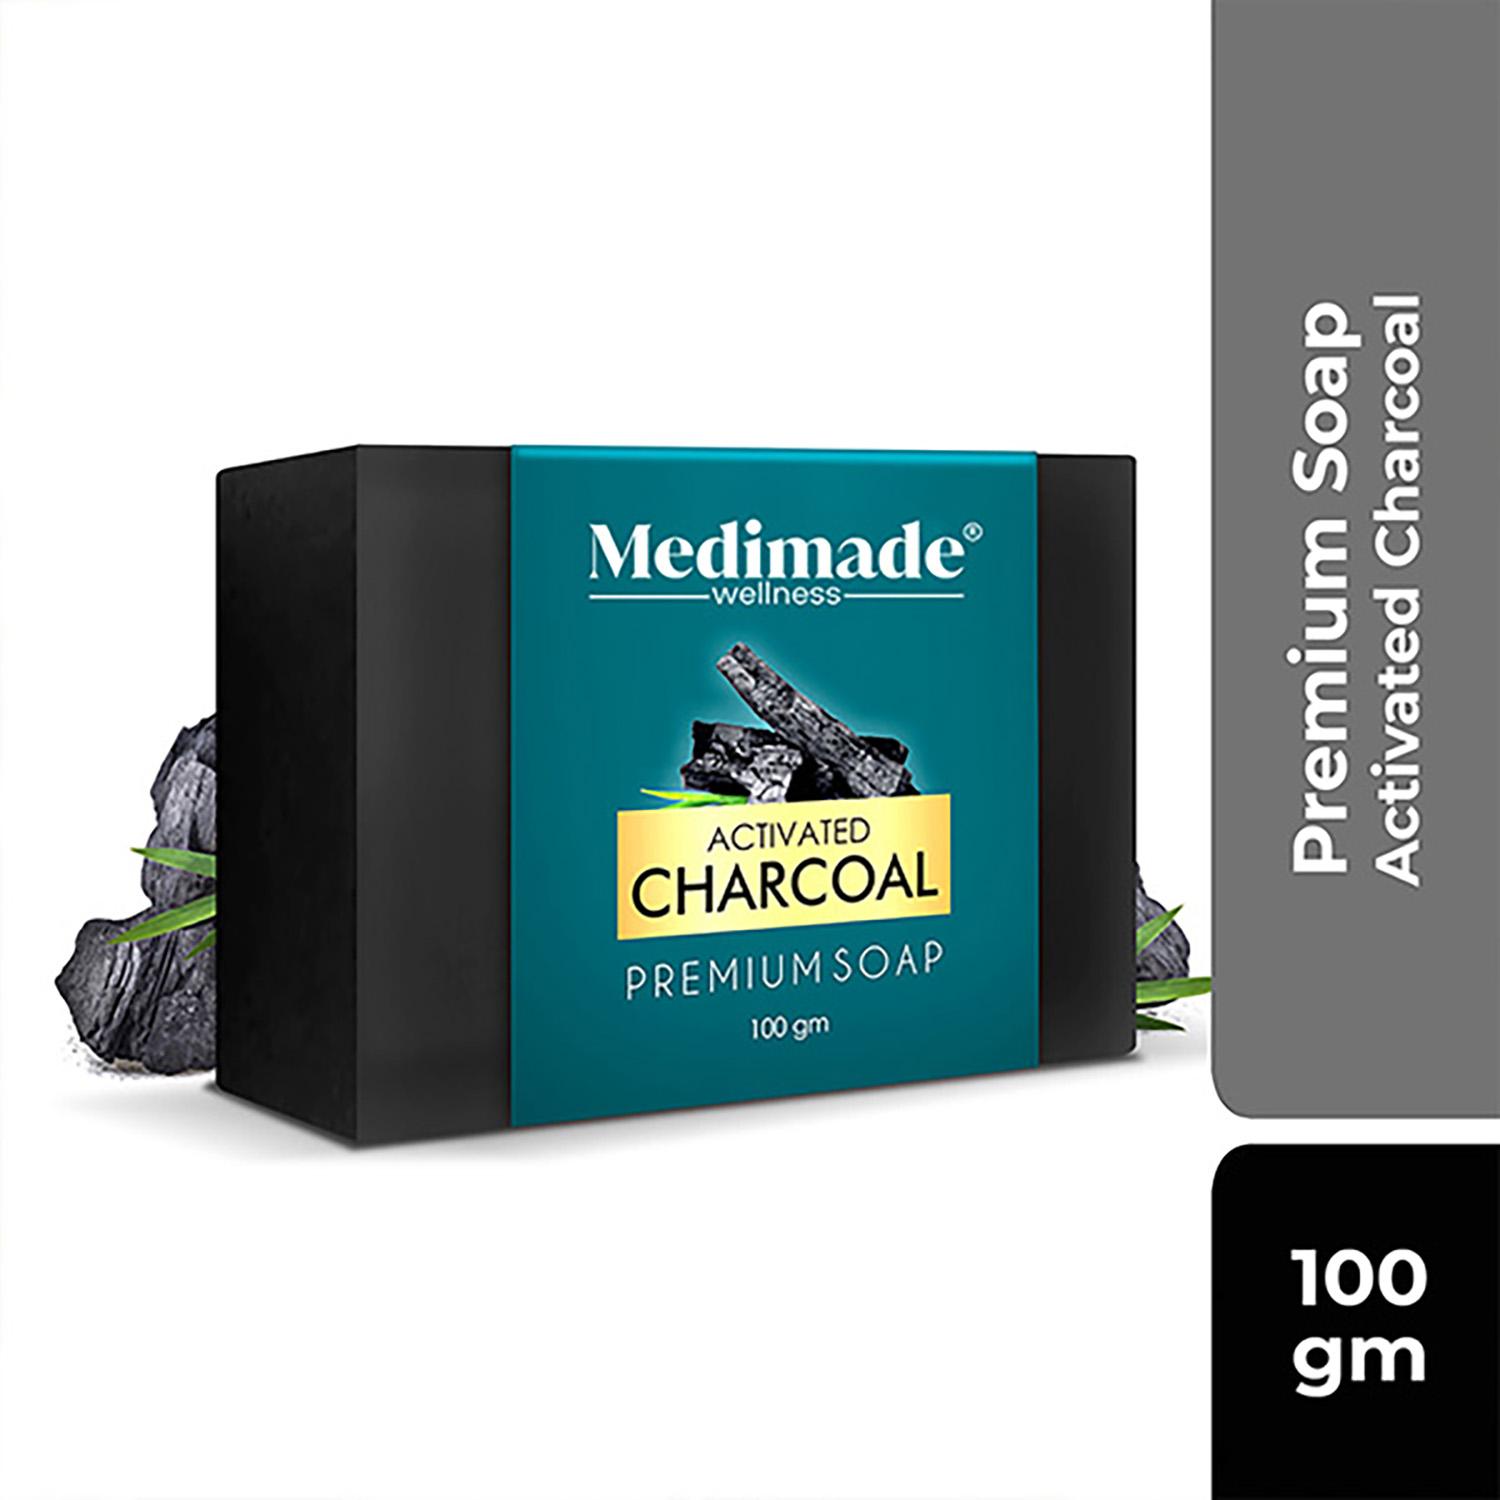 Medimade | Medimade Activated Charcoal Premium Soap (100g)